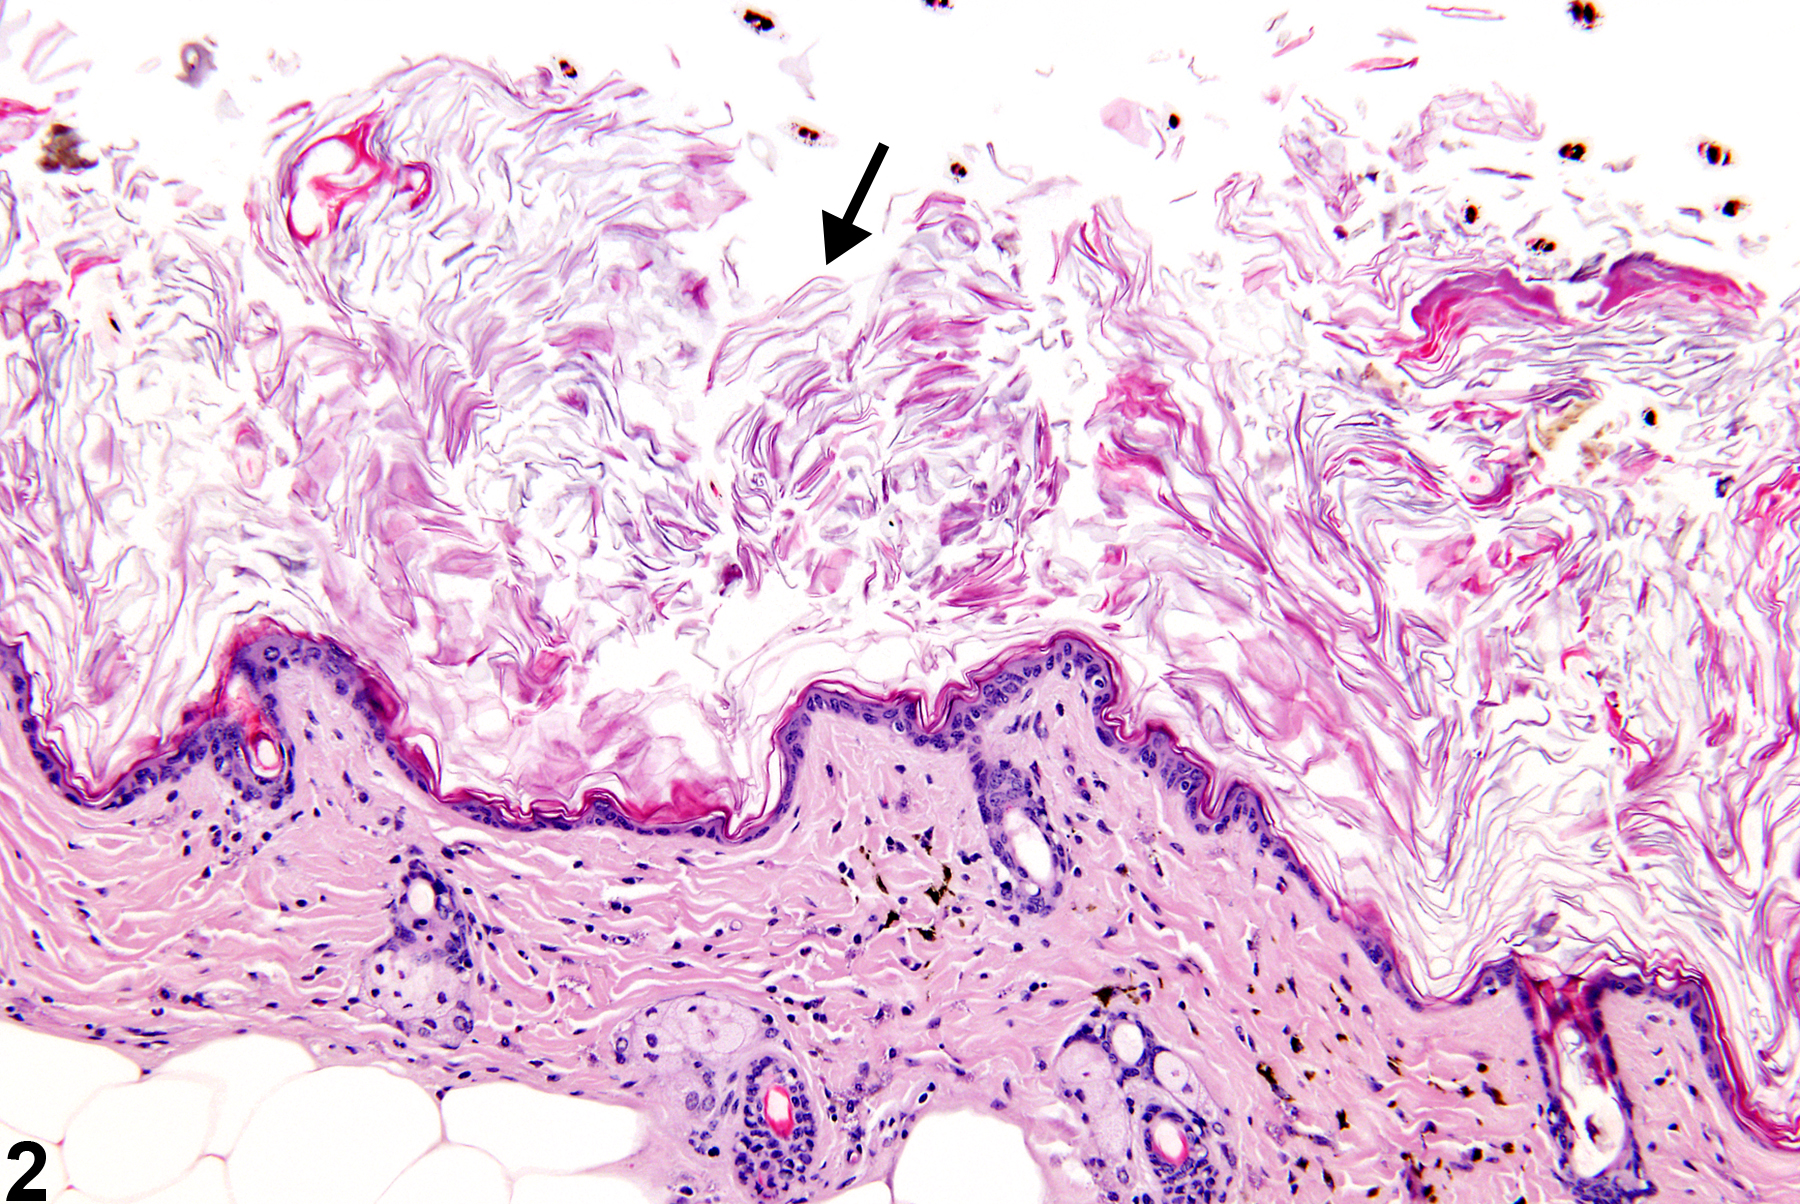 Image of hyperkeratosis in the skin from a female B6C3F1 mouse in a chronic study